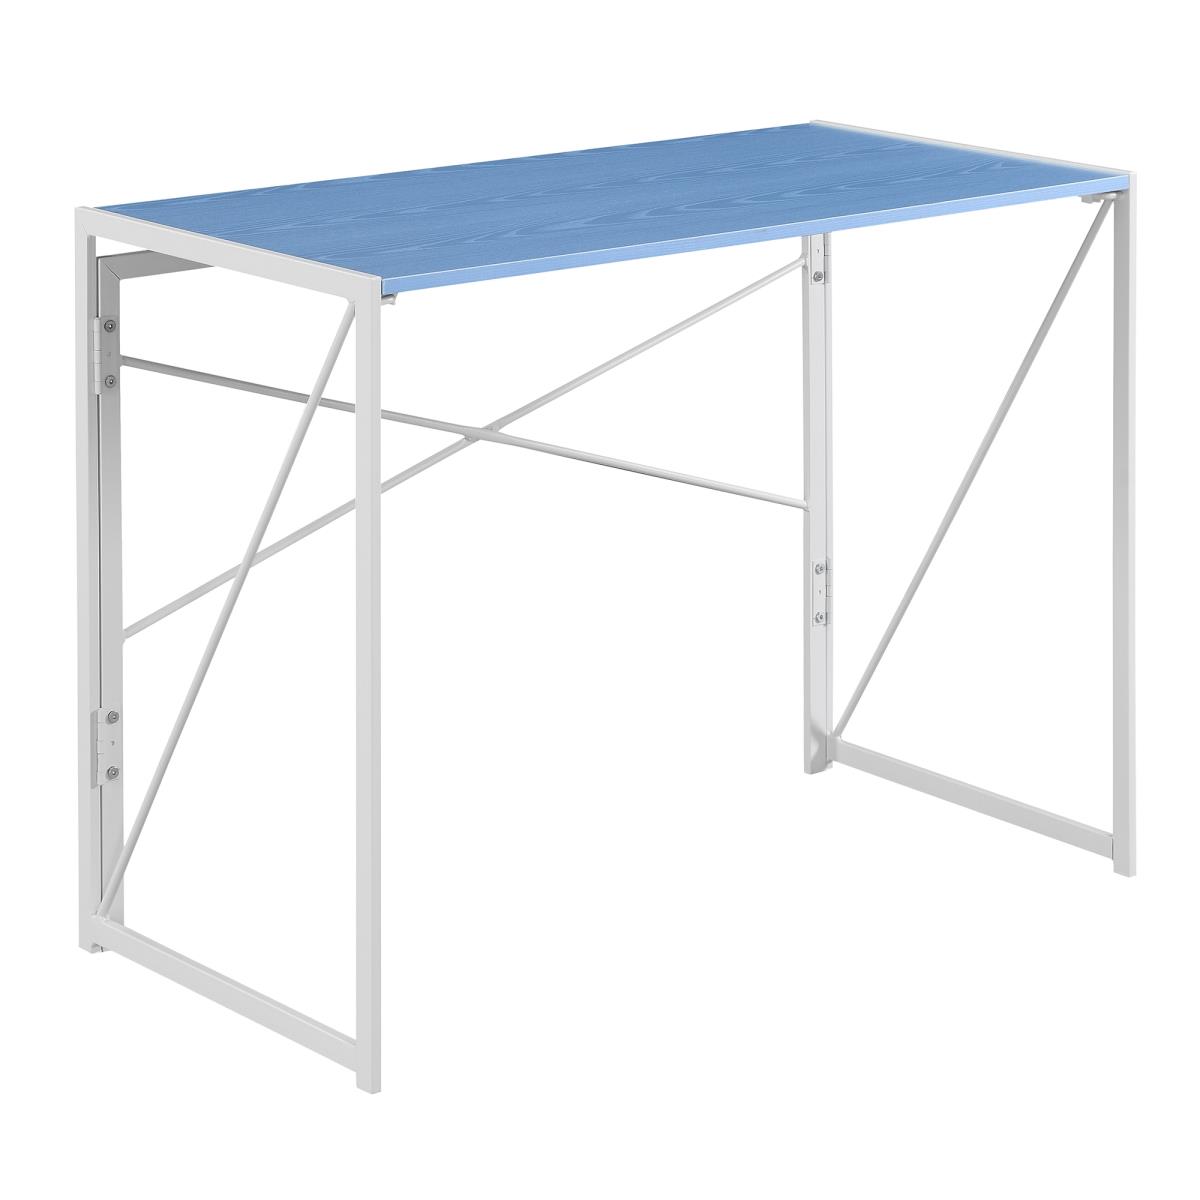 Picture of Convenience Concepts 090110BEWF 39.5 x 19.75 x 29 in. Xtra Folding Desk